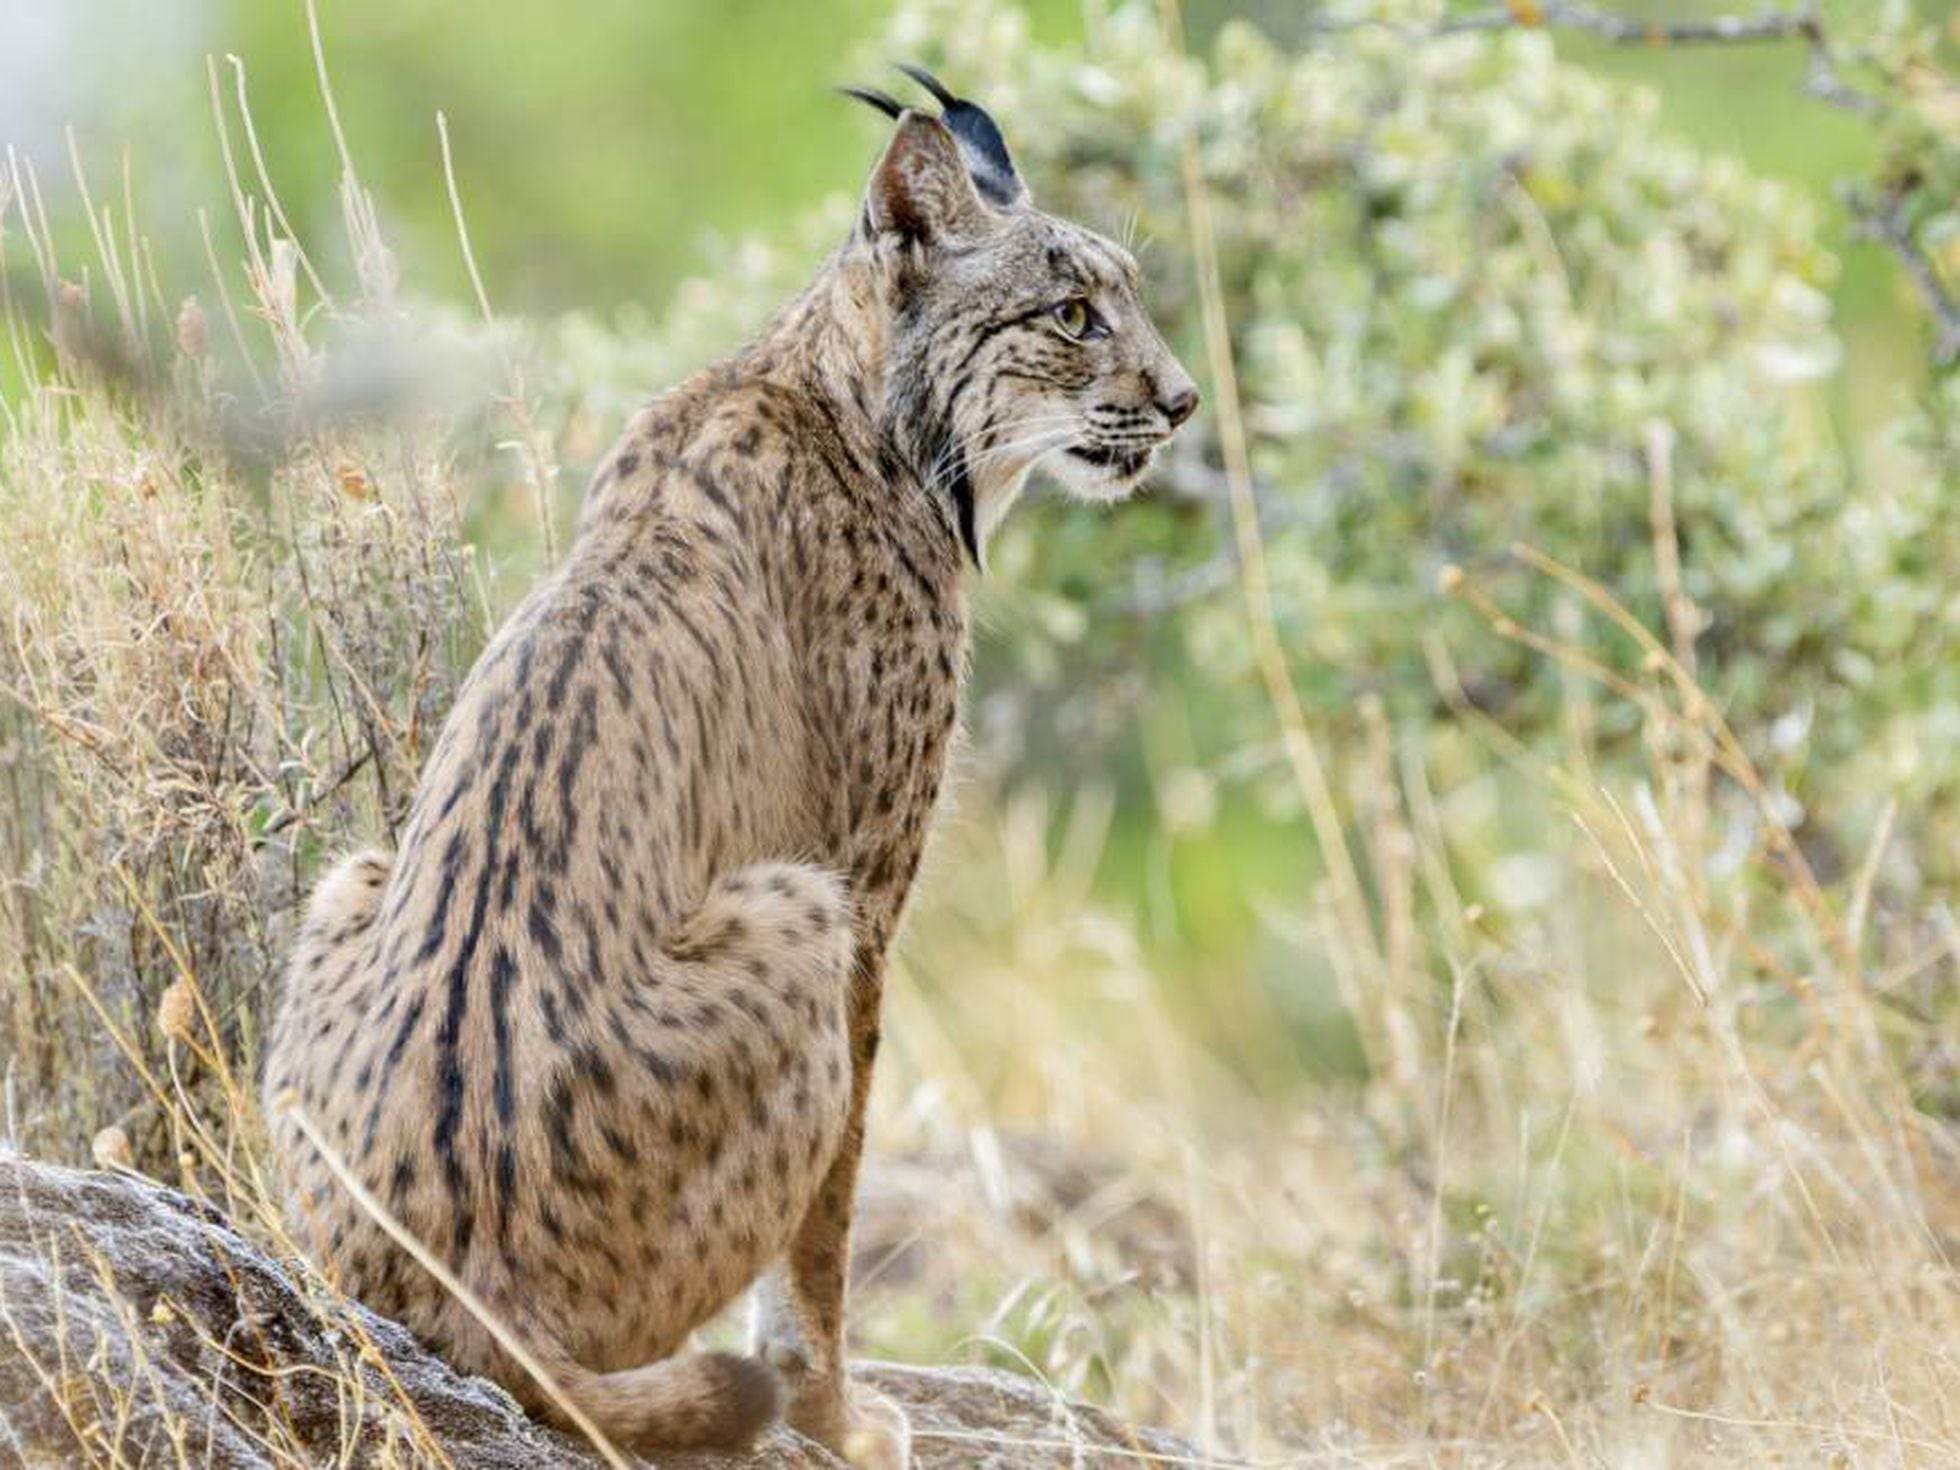 Spain's Iberian lynx population soars to 1,000, but species remains  endangered | Society | EL PAÍS English Edition